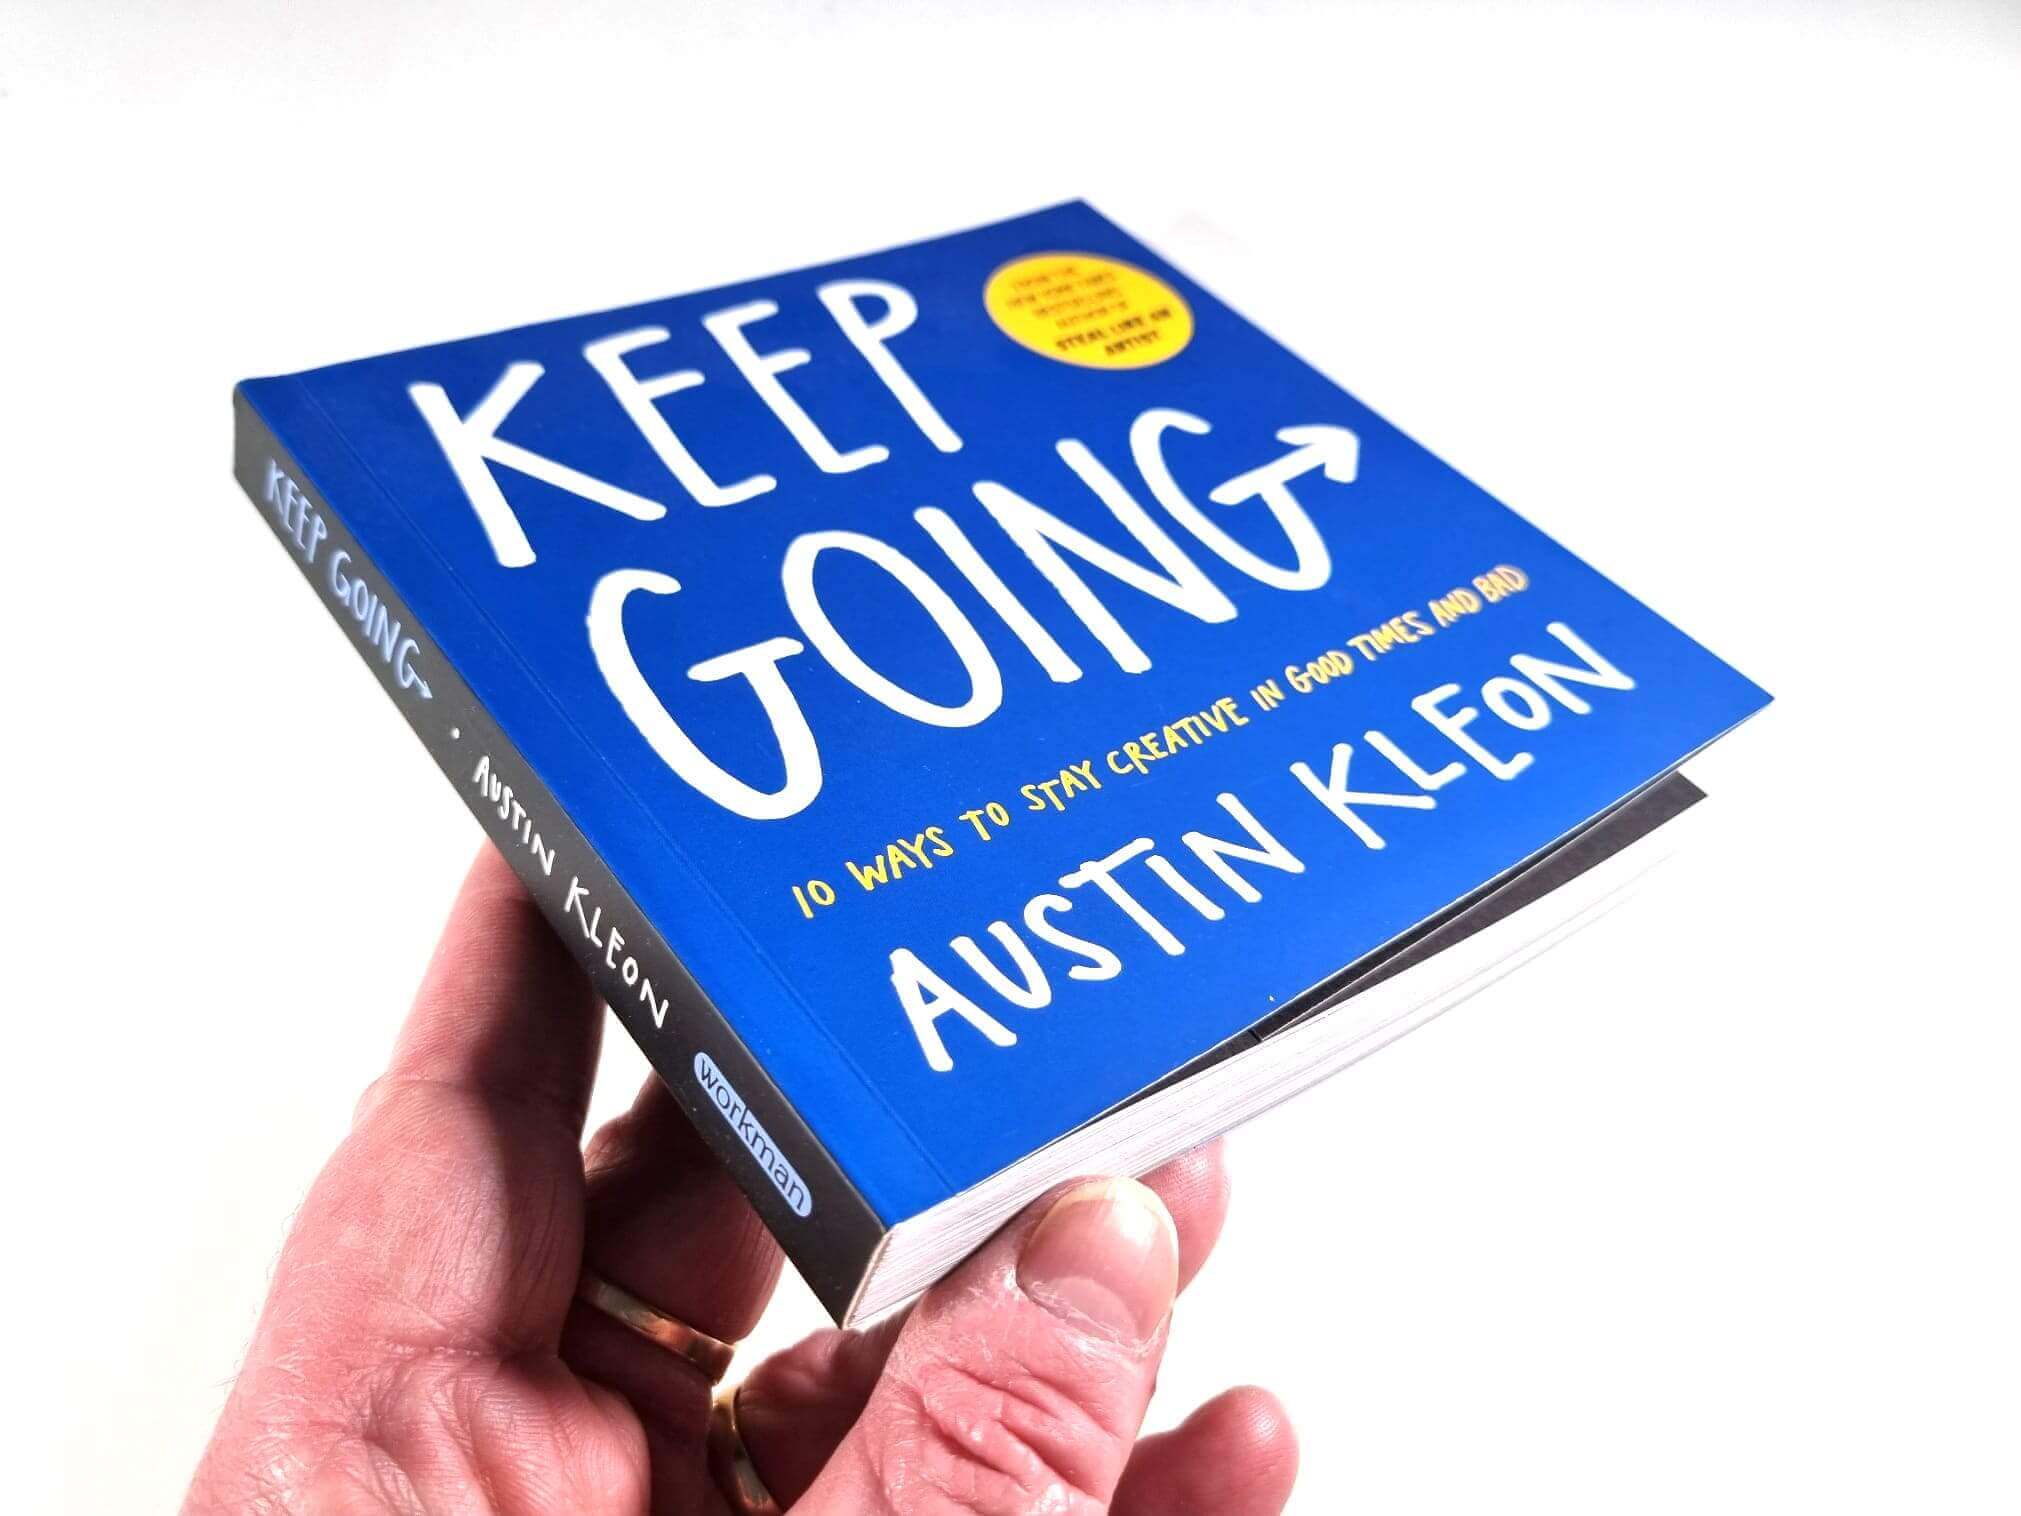 Book Review - Keep Going by Austin Kleon